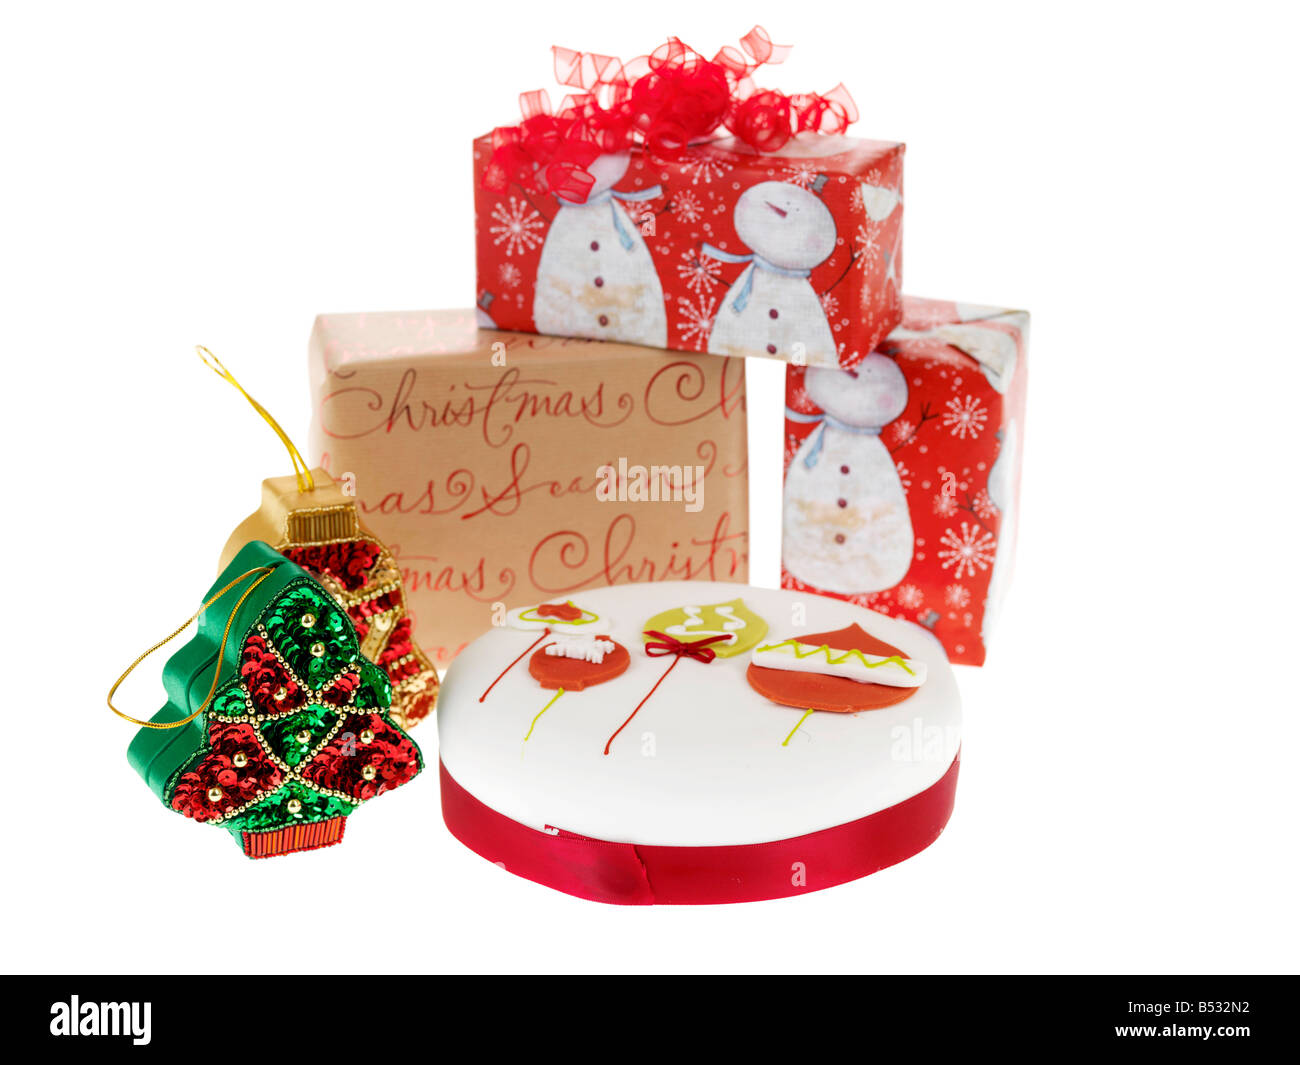 Traditional Rich Fruit Cake With White Icing Decorated For Christmas Isolated Against A White Background With No People And A Clipping Path Stock Photo